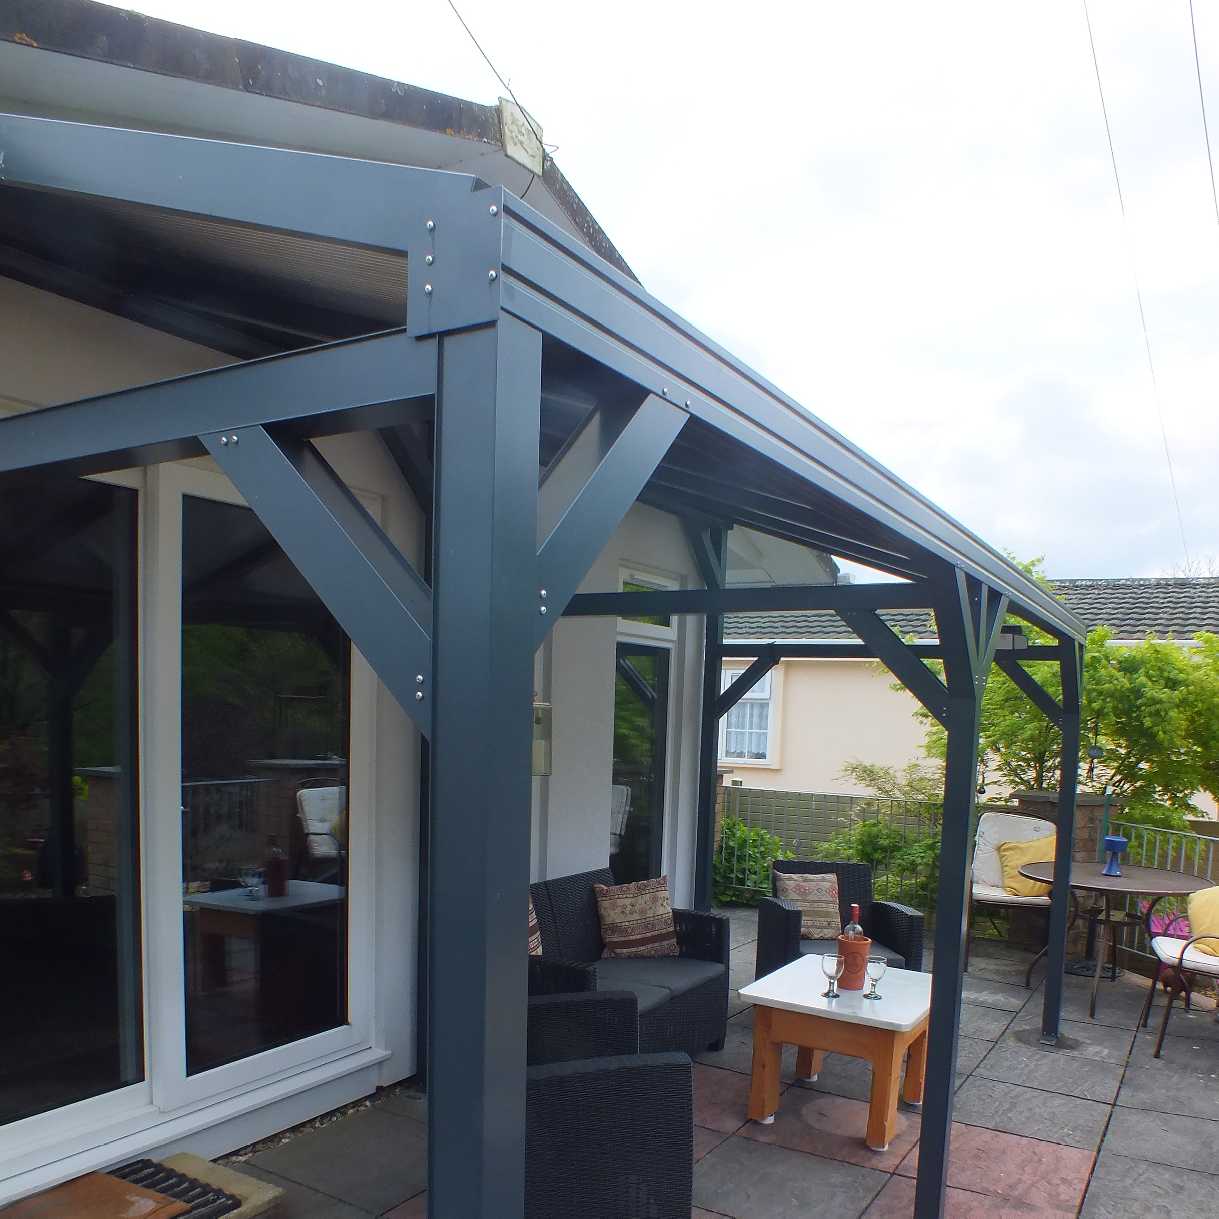 Affordable Omega Smart Free-Standing, Anthracite Grey MonoPitch Roof Canopy with 16mm Polycarbonate Glazing - 6.3m (W) x 4.0m (P), (8) Supporting Posts